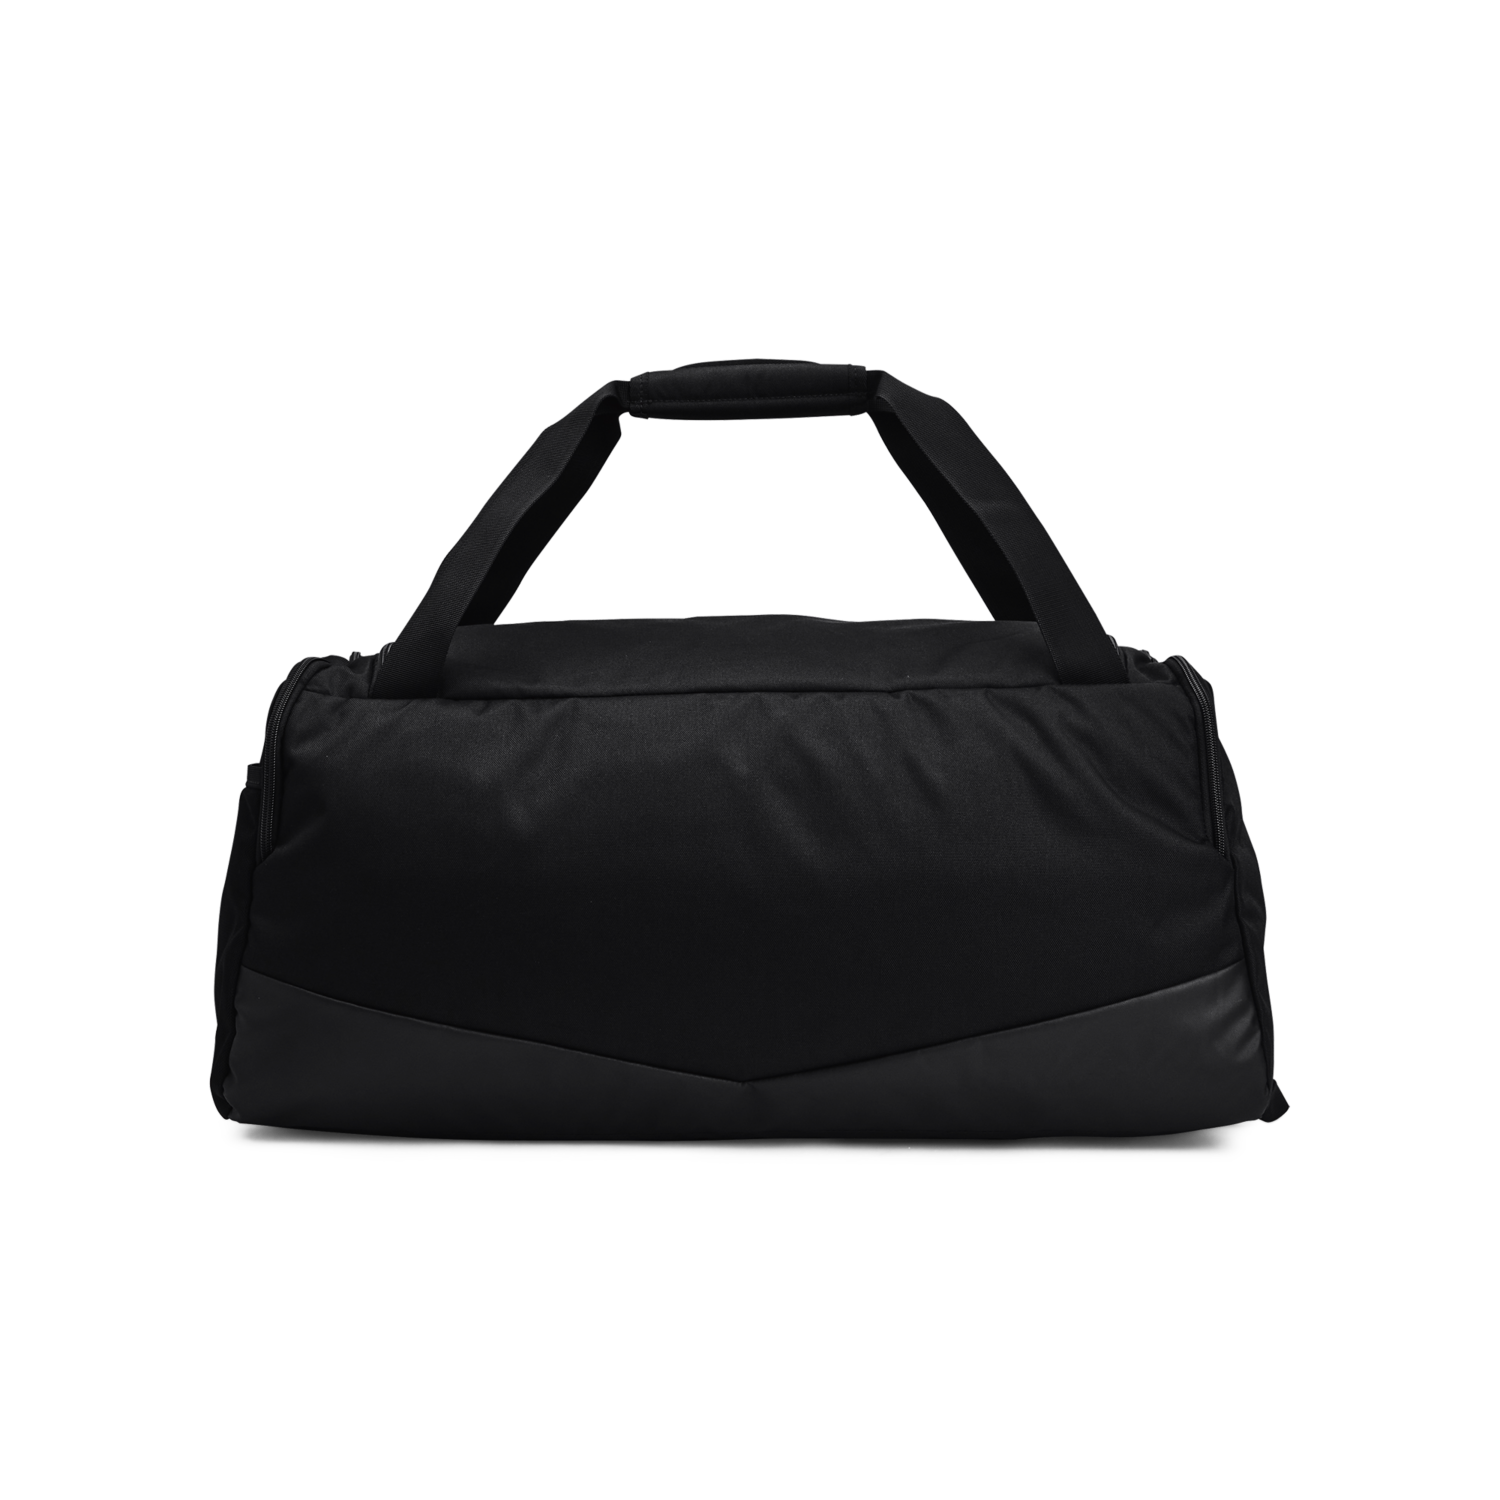 Under Armour Undeniable 5.0 Duffle MD